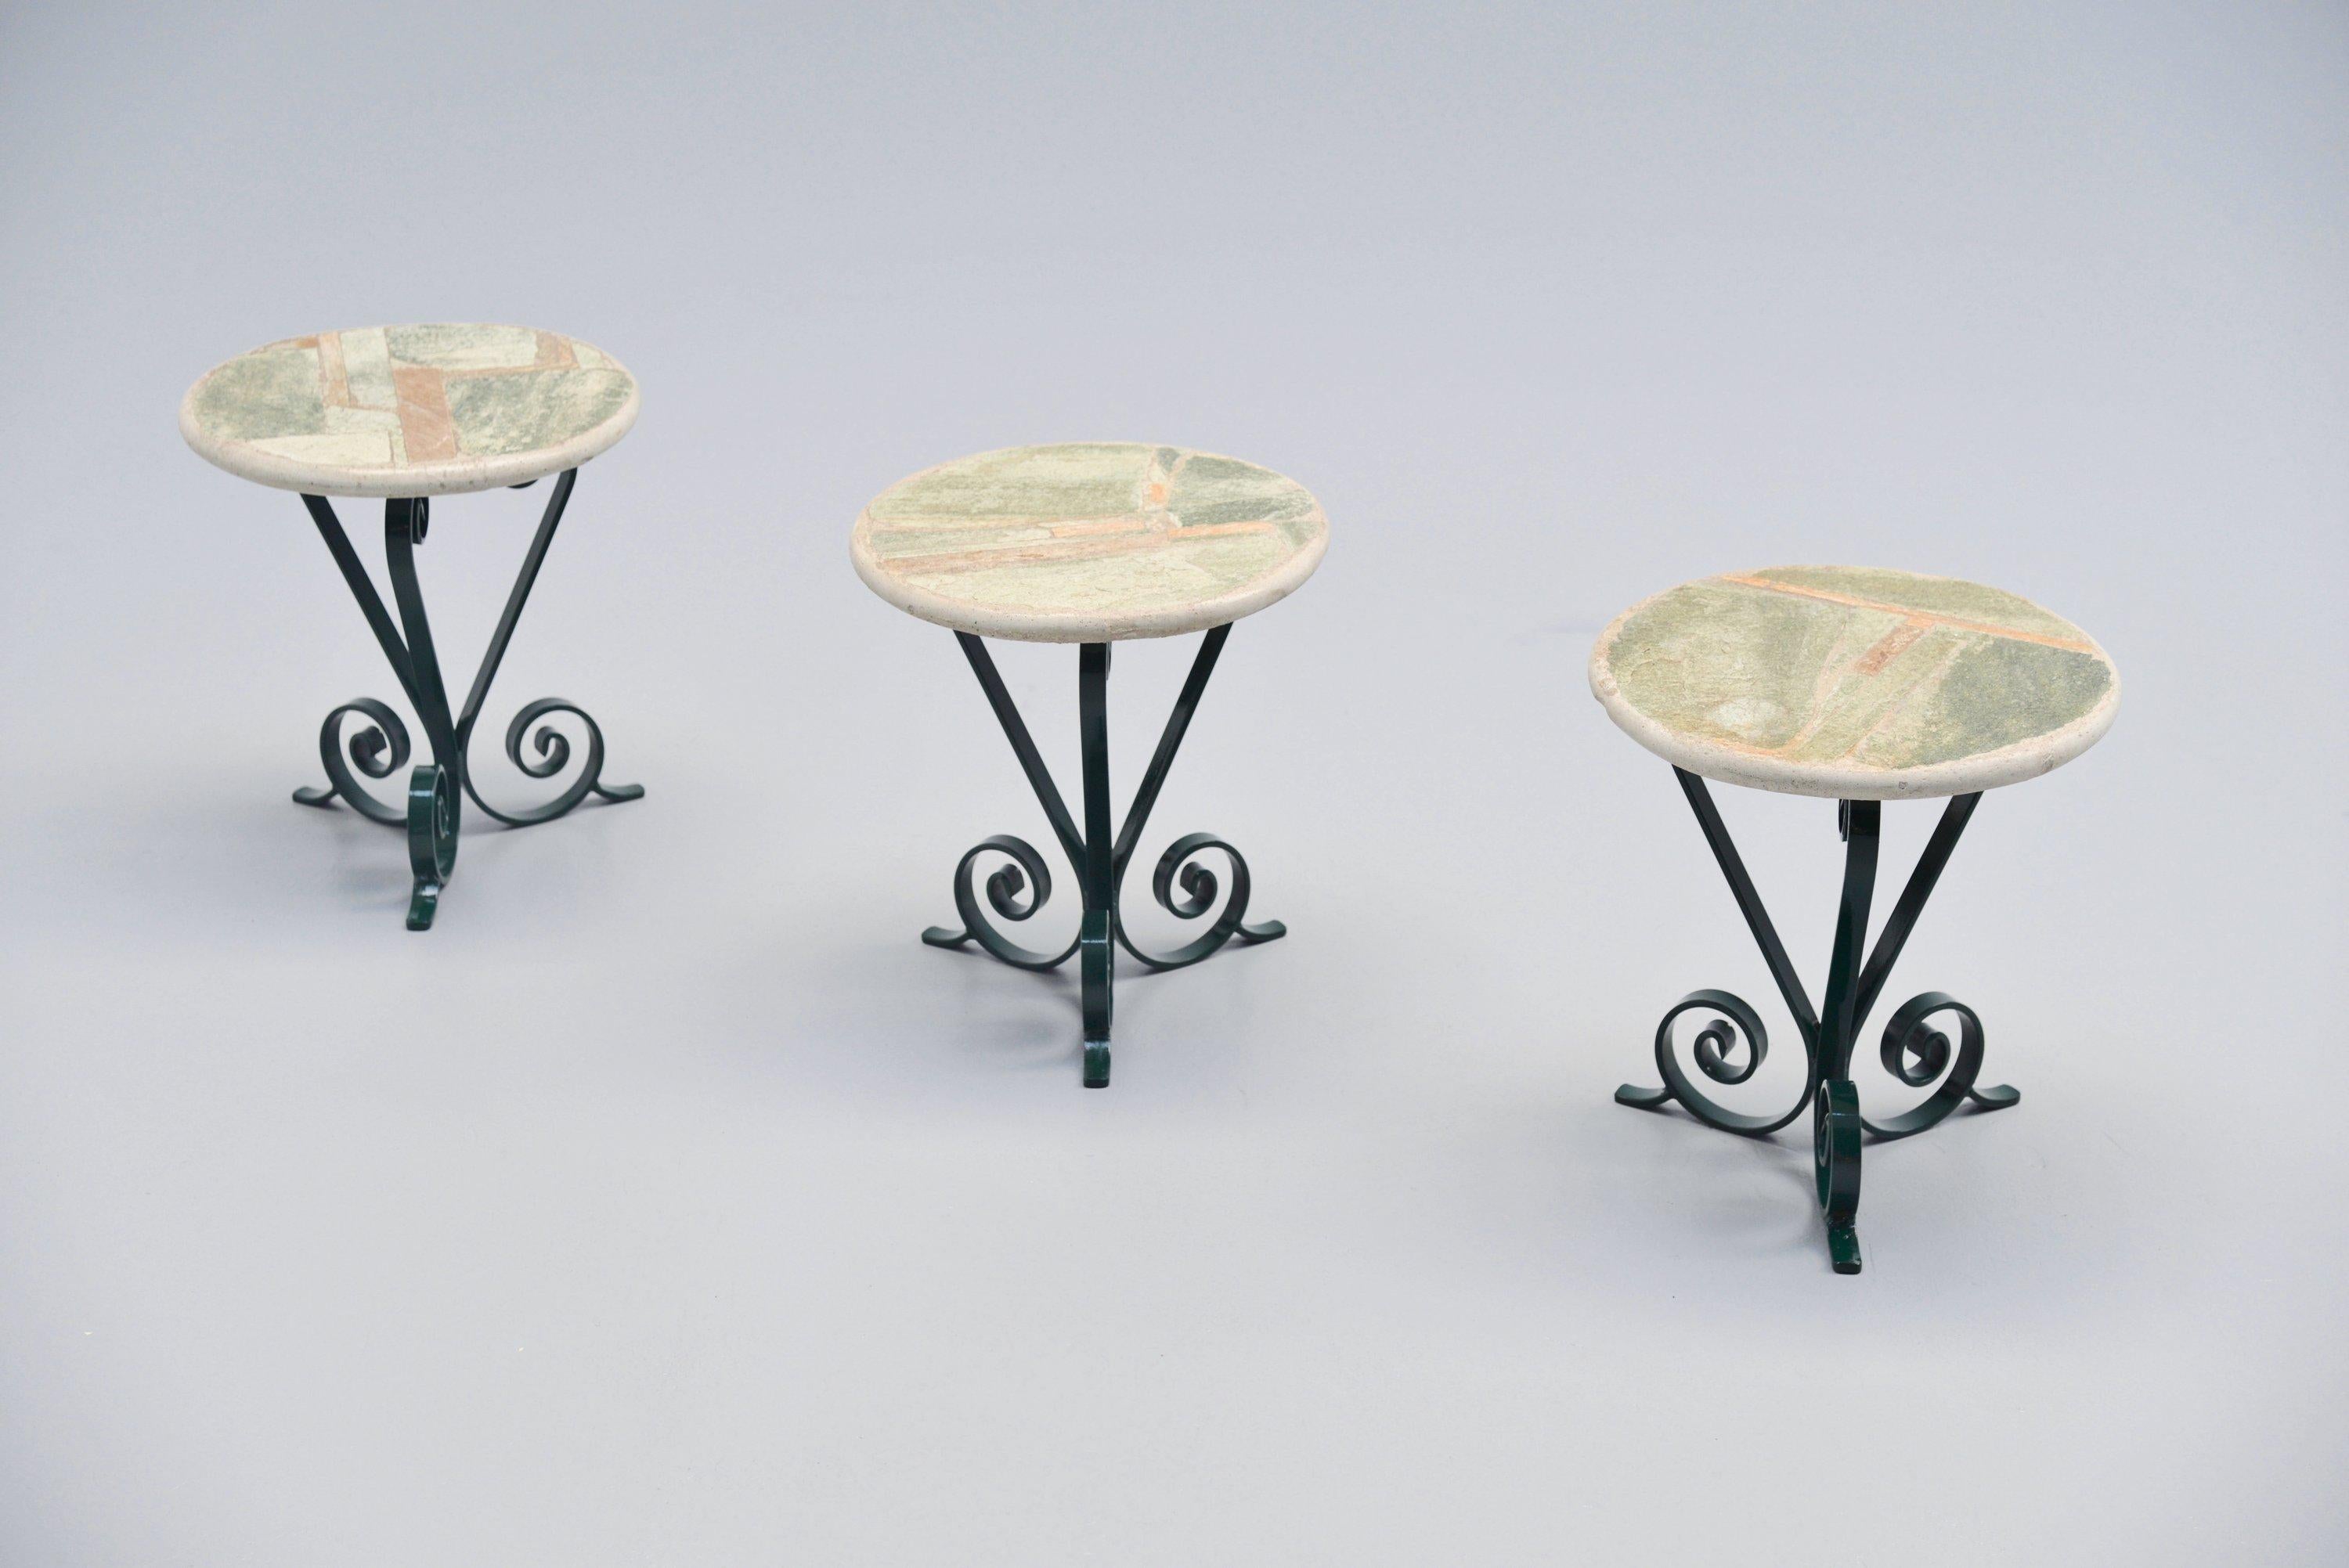 Rare and unusual set of 3 side tables designed and made by Paul Kingma, Holland, circa 1980. These tables are unsigned but came directly from the Kingma family, they were used outdoors on the terrace. Small side tables are very hard to find, in the